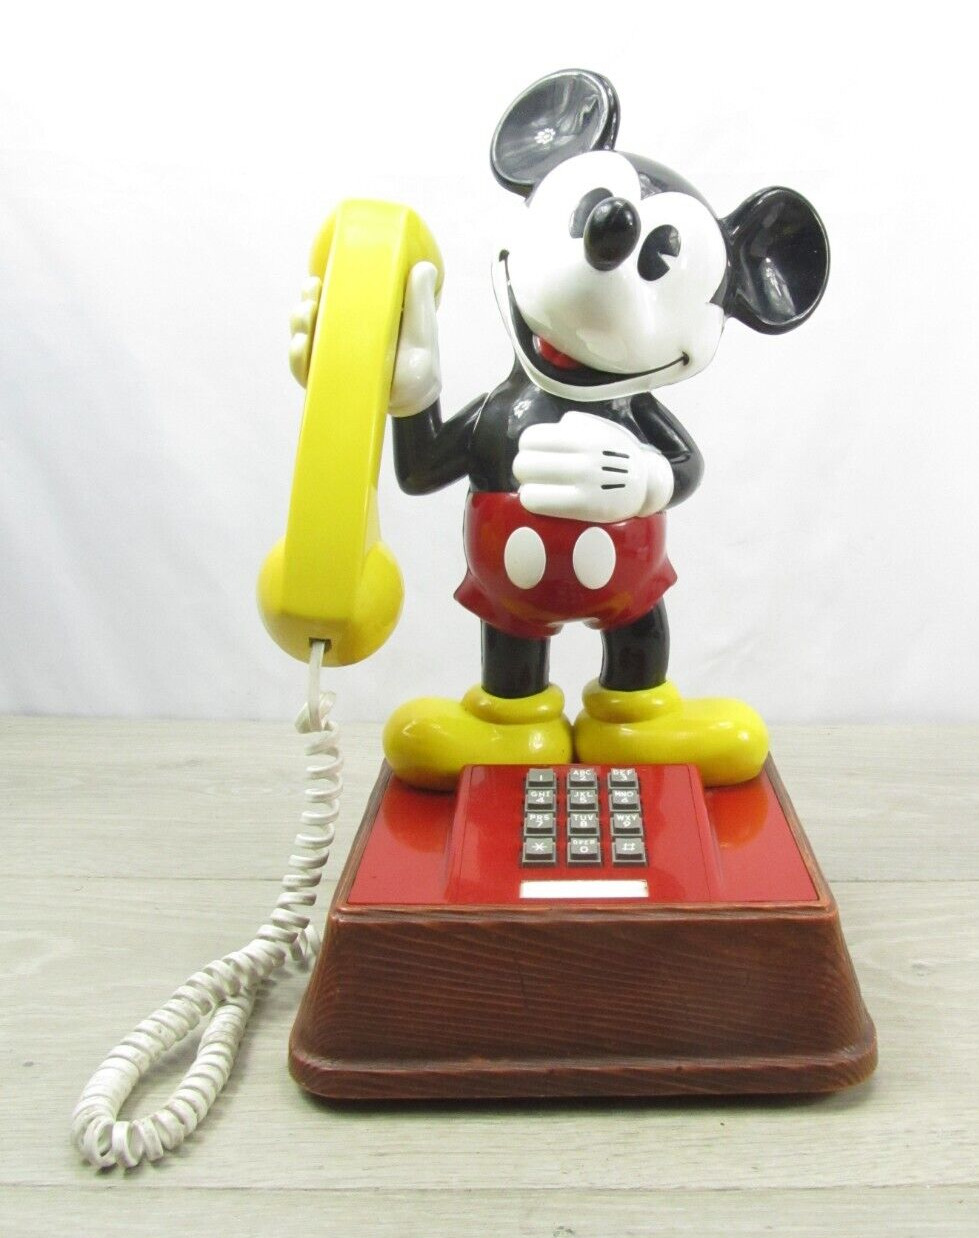 Vintage The Mickey Mouse Phone 1776 Landline Psh Button Telephone Disney 15 inch